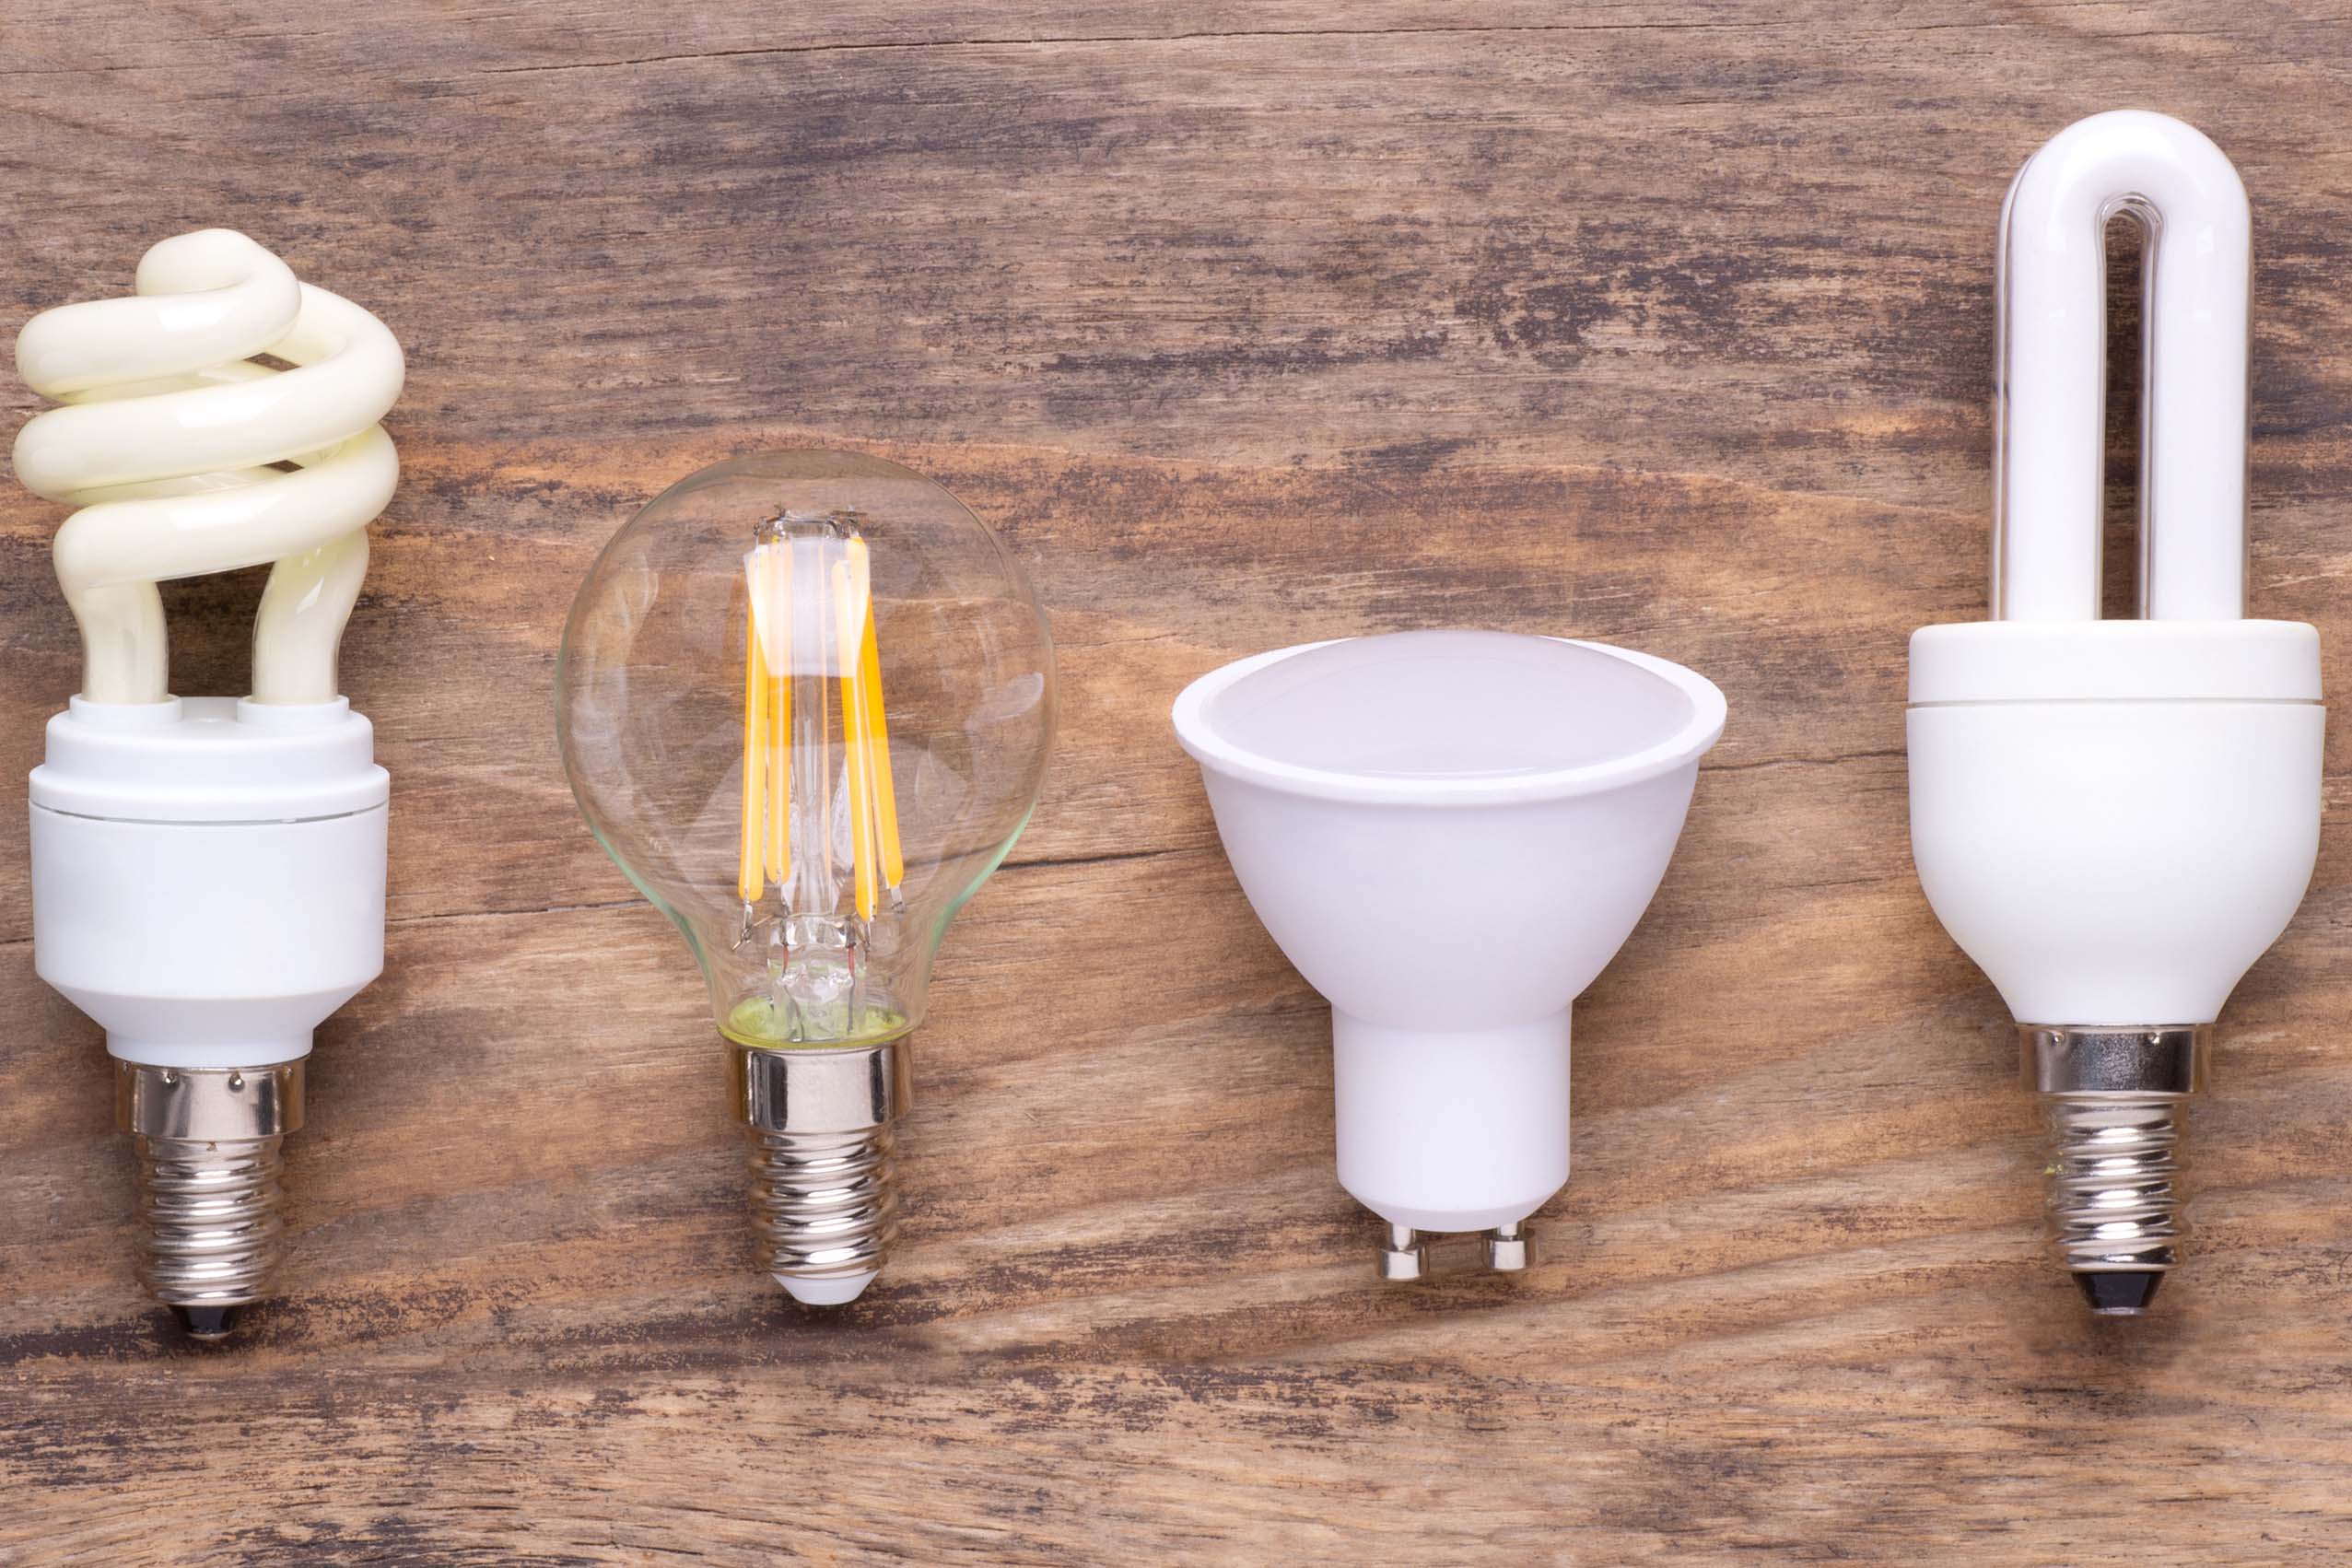 Different Types of Light Bulbs